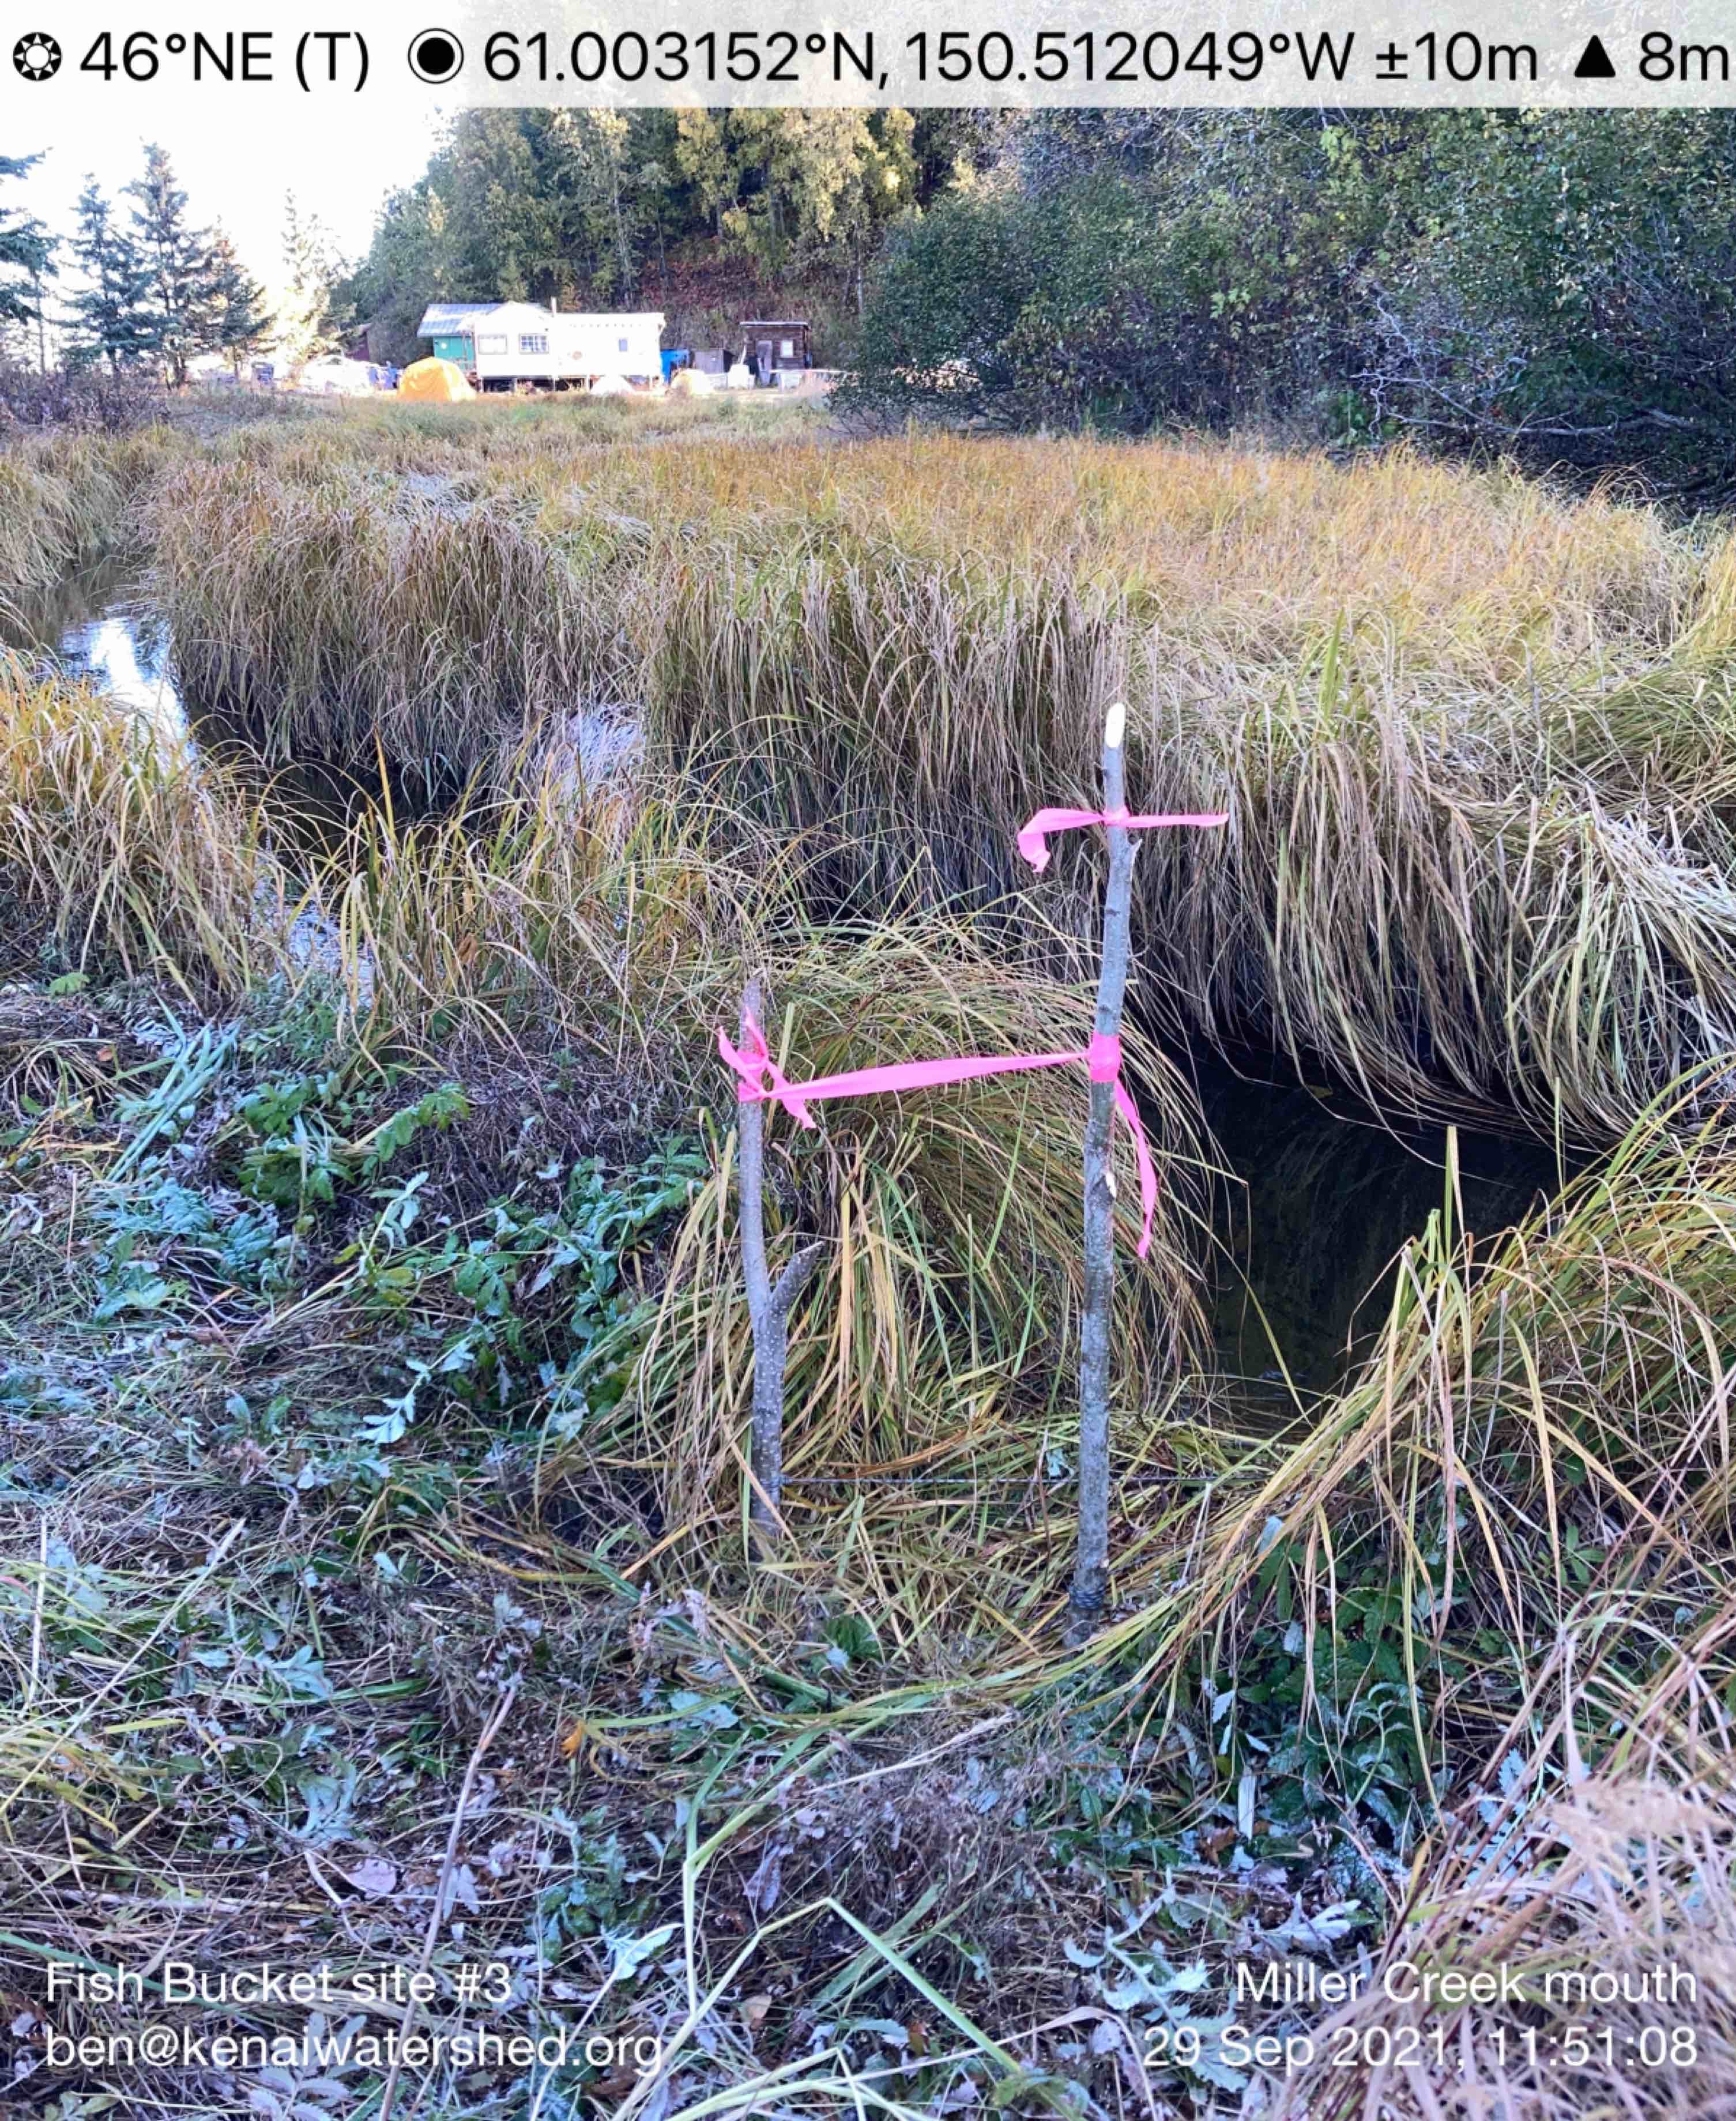 Site for storage of perforated five-gallon bucket to store juvenile fish